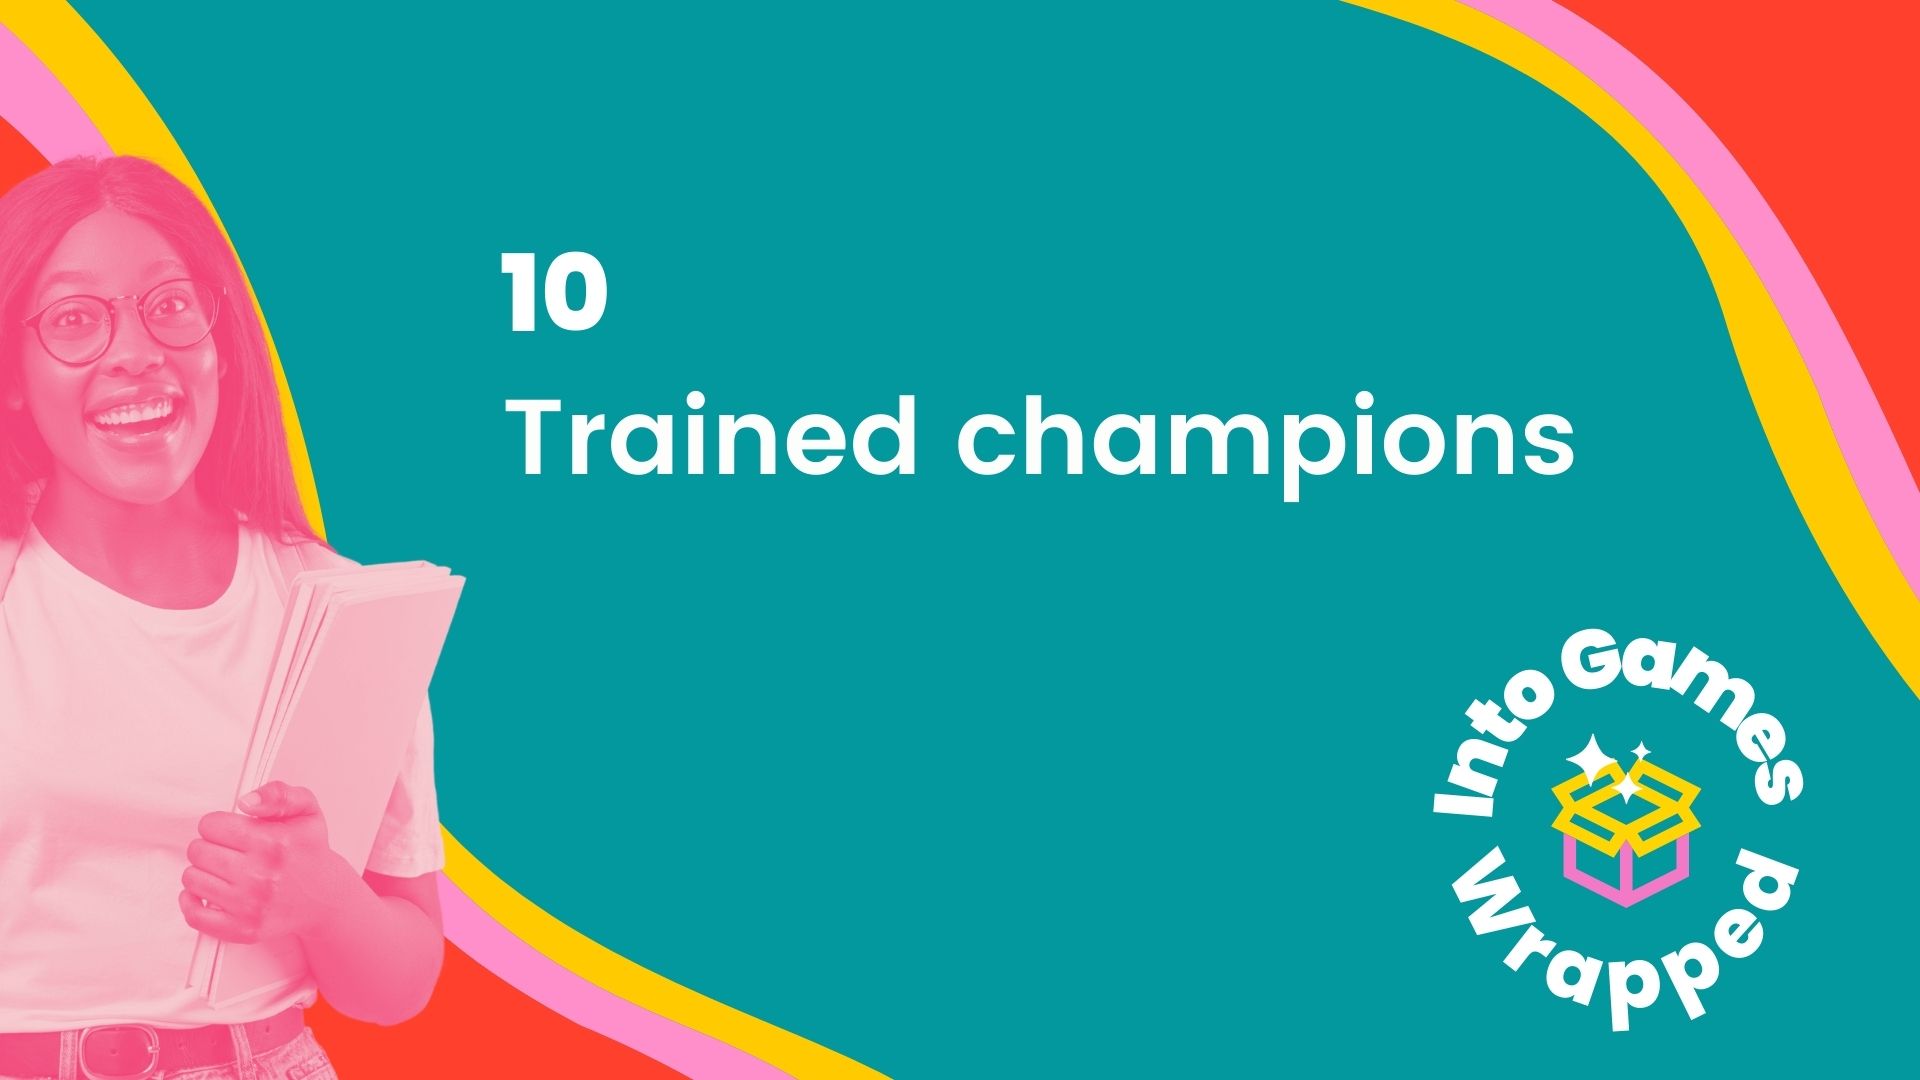 ten trained champs for studio gobo